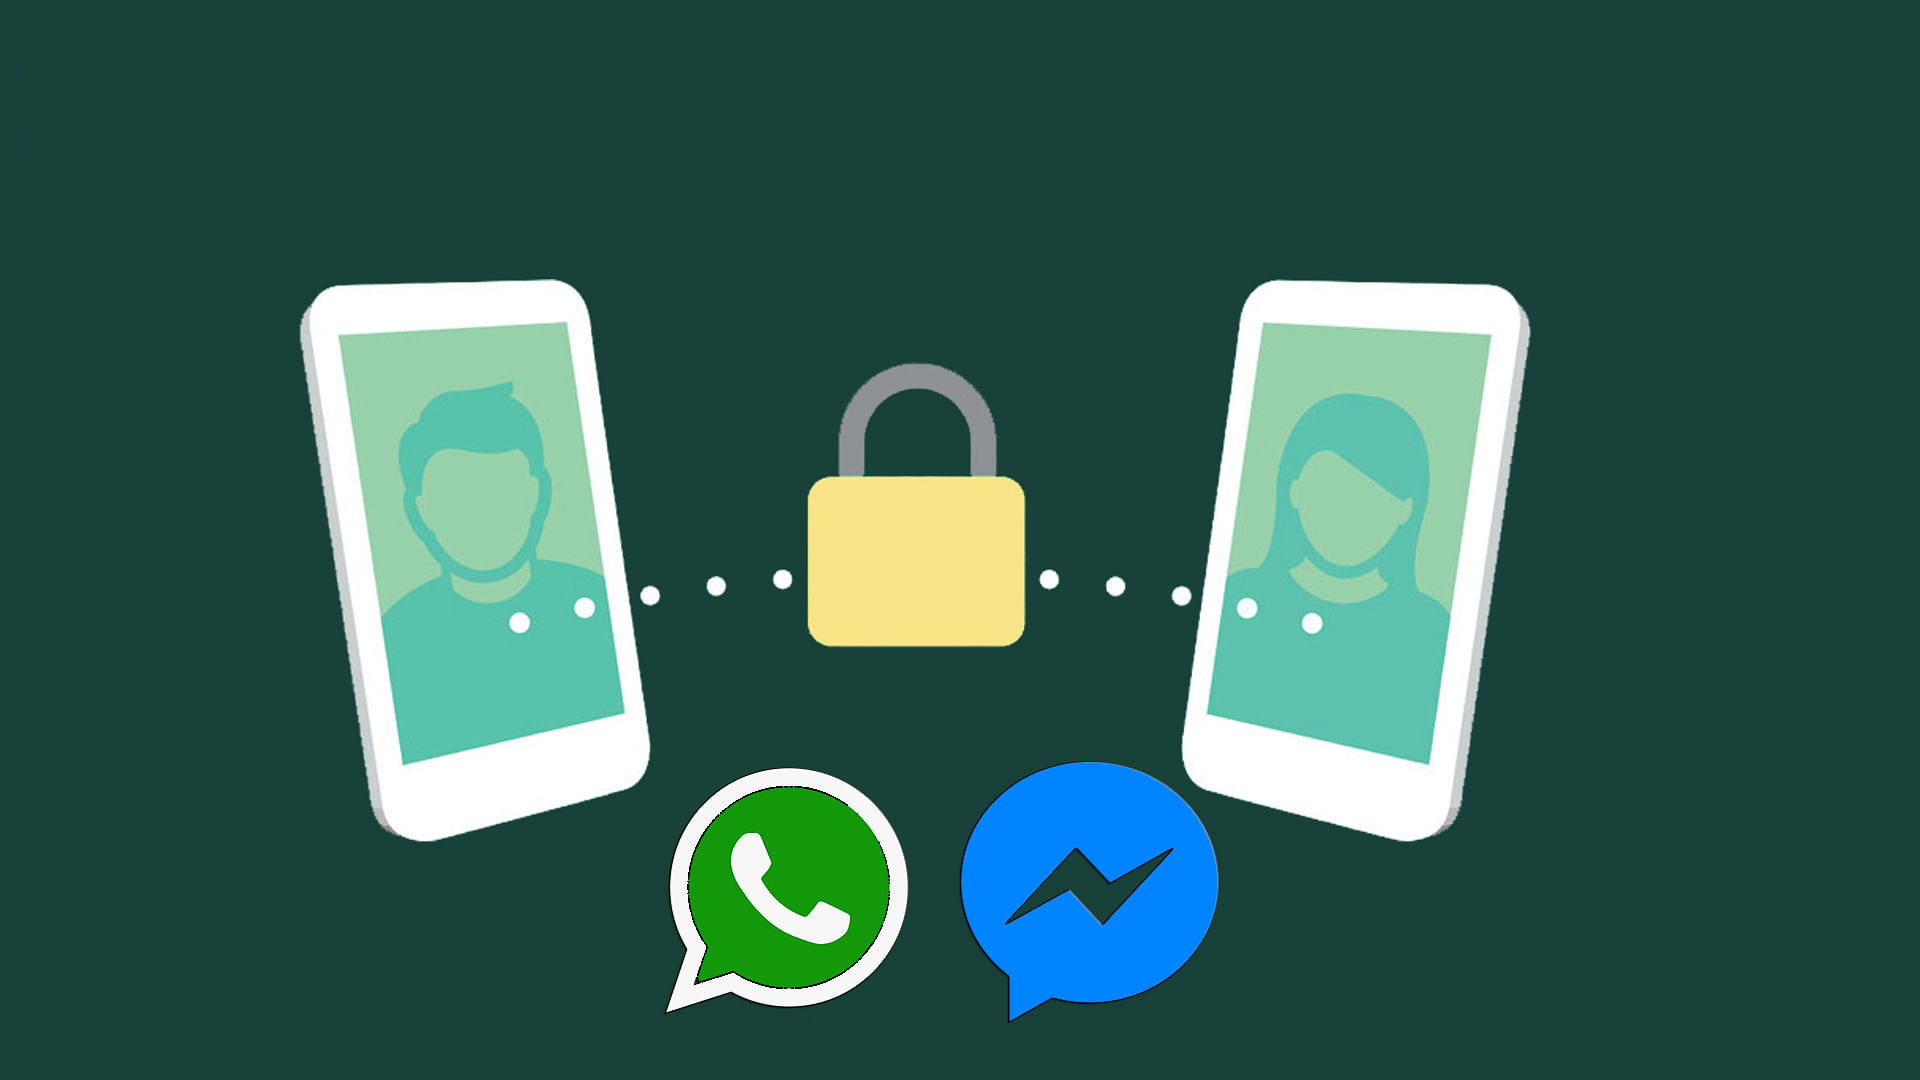 WhatsApp wants to retain the core essence of encryption of its platform.